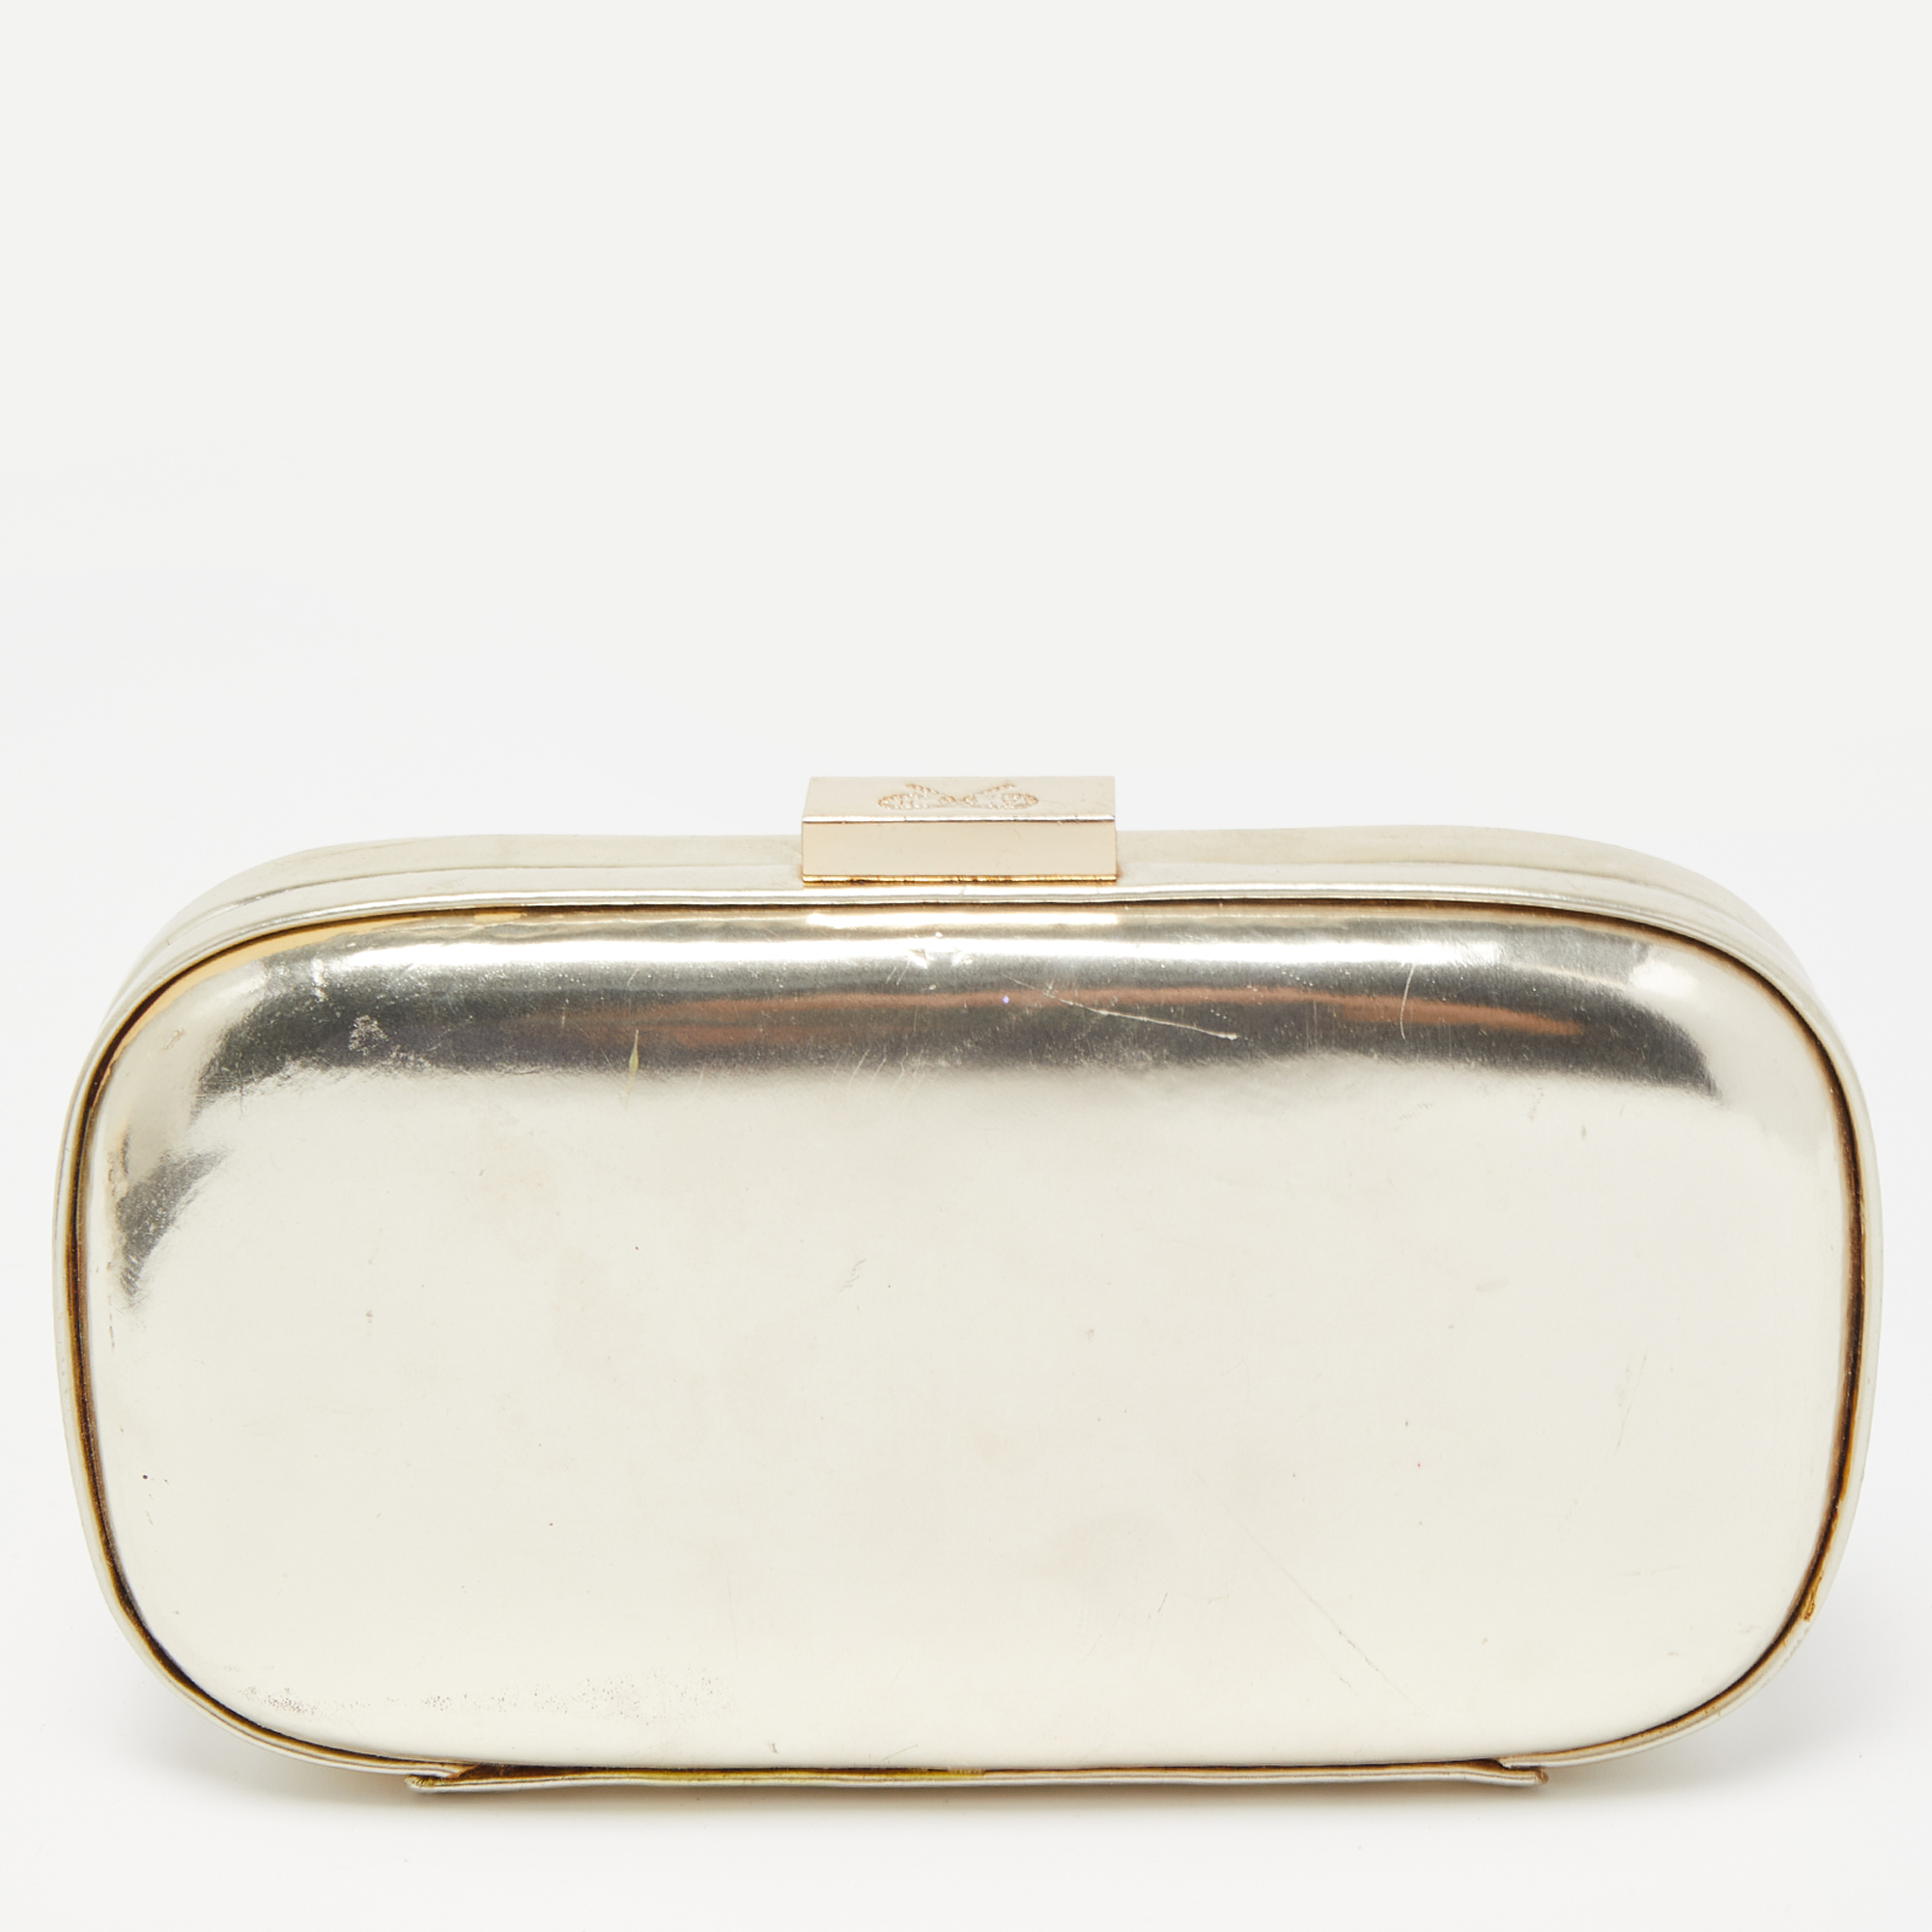 Anya Hindmarch Pale Gold Leather Marano Clutch